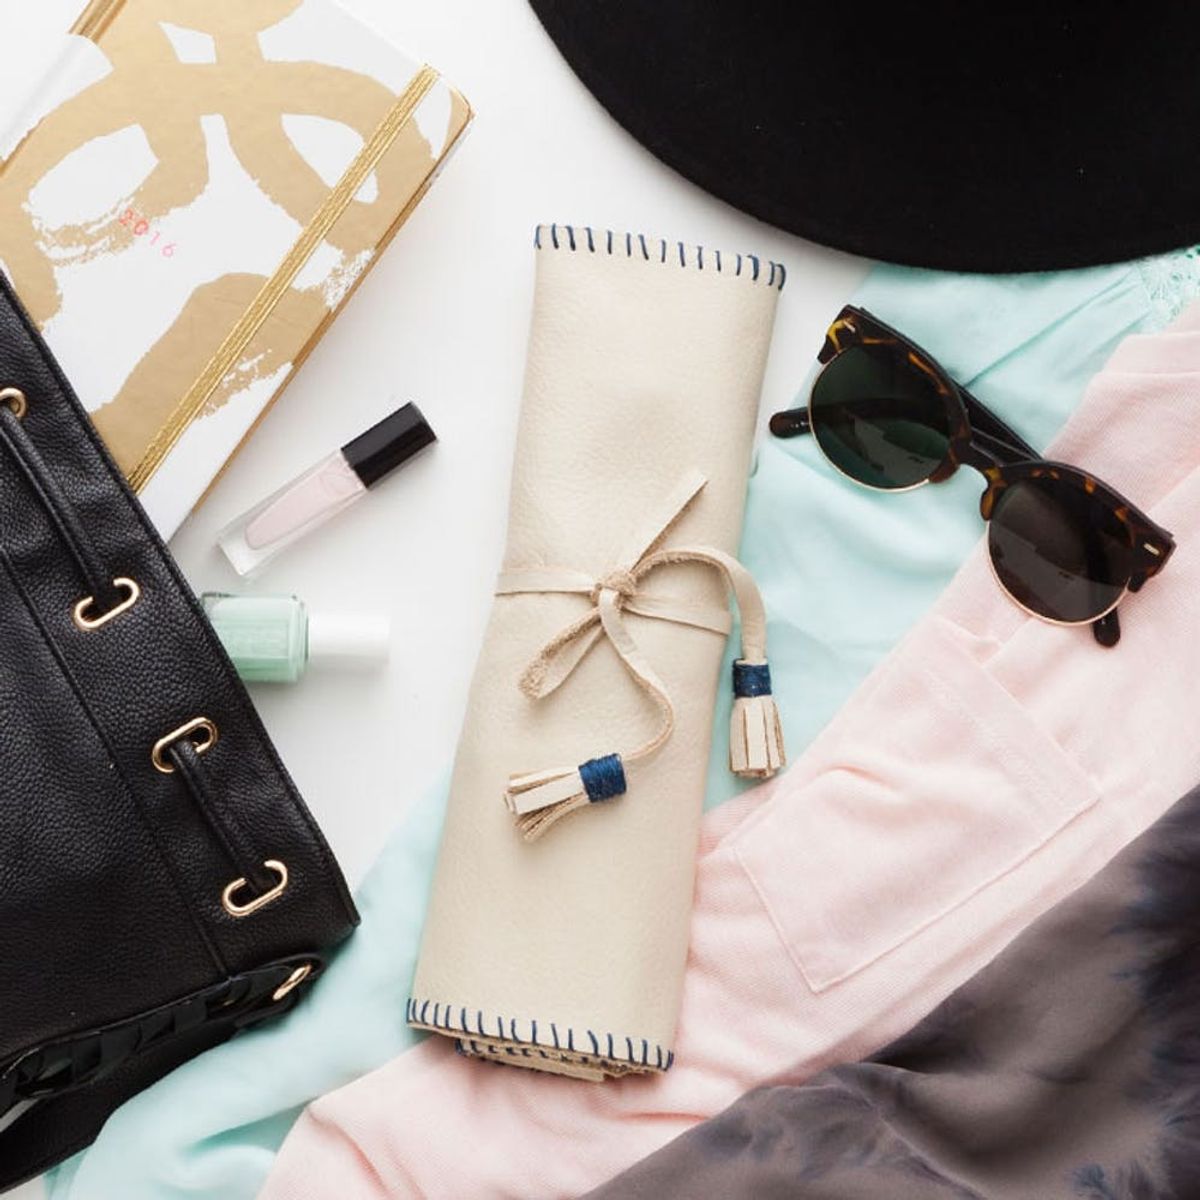 Pack All Your Favorite Pieces in This DIY Travel Jewelry Roll